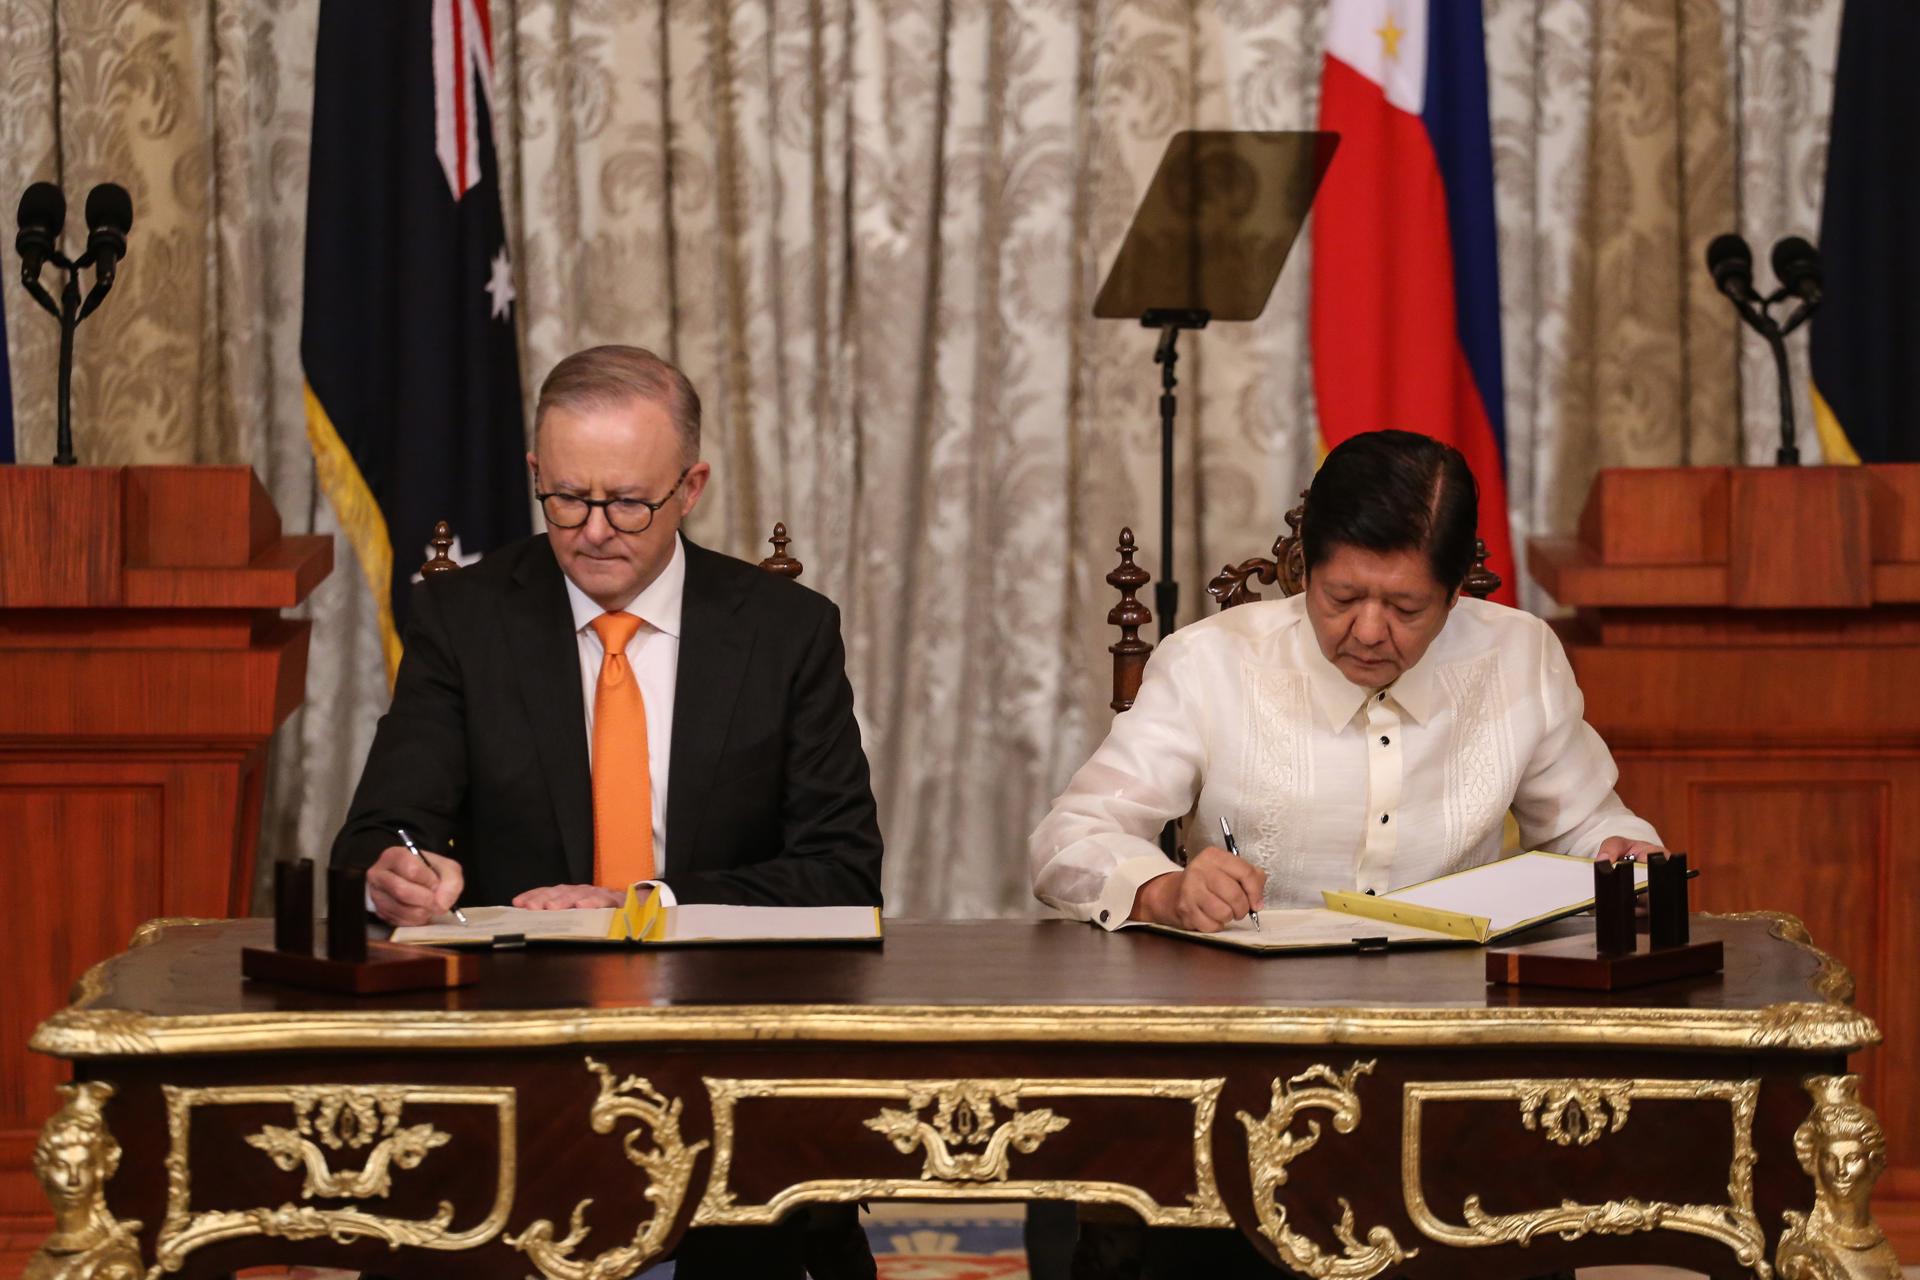 Philippine President Ferdinand Marcos Jr. (R) and Australian Prime Minister Anthony Albanese (L) sign documents during a bilateral meeting inside the Malacanang Presidential Palace in Manila, Philippines, 08 September 2023. EFE-EPA/EARVIN PERIAS / POOL